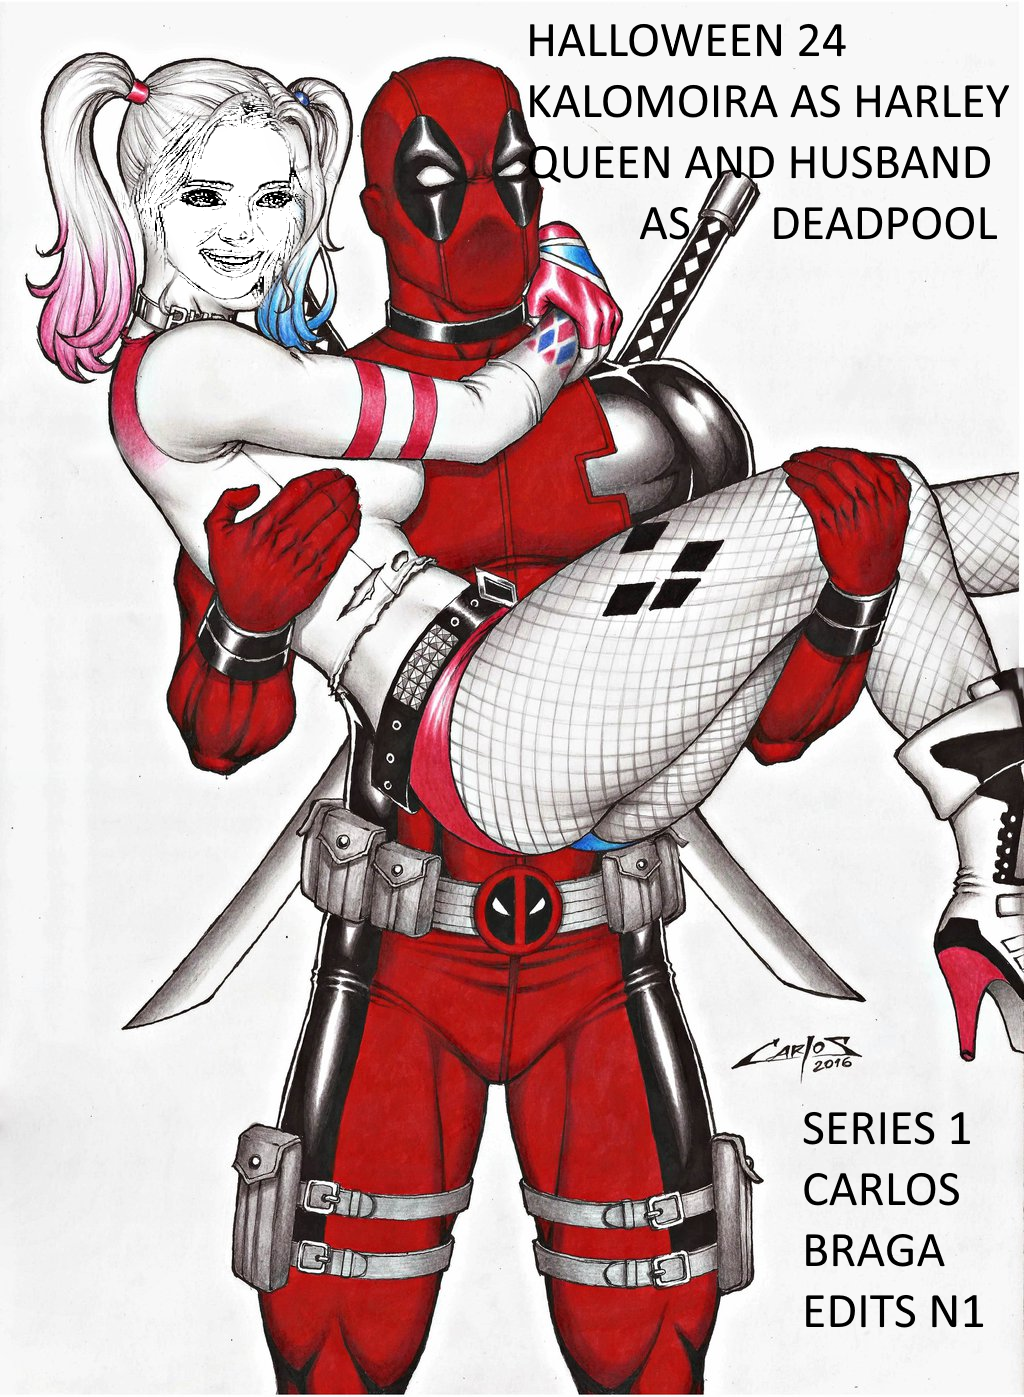 044_deadpool_and_harley_sale_on_e_bay_auction_now_KALOMOIRA ABD GEORGE.png